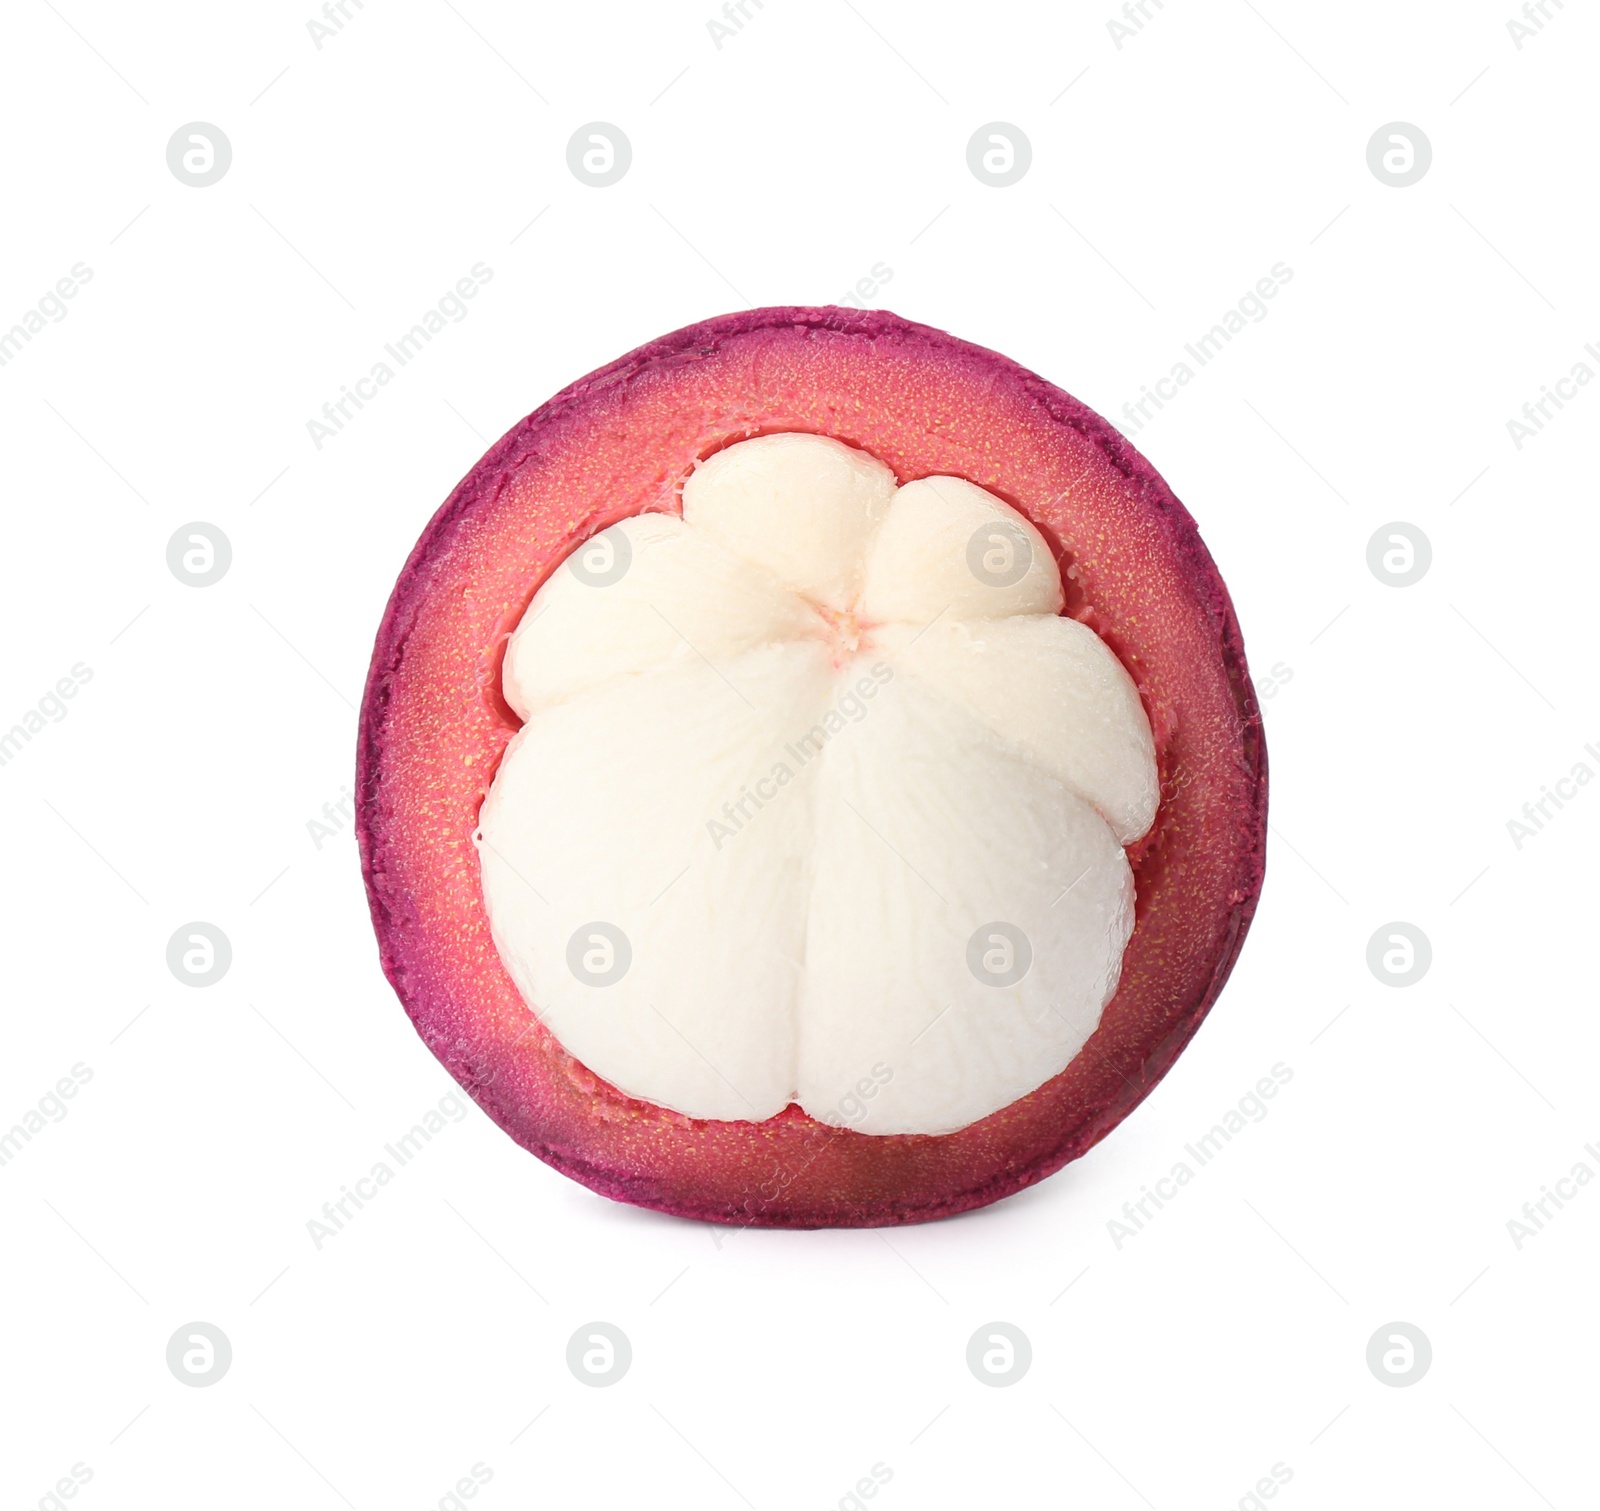 Photo of Delicious cut mangosteen fruit isolated on white